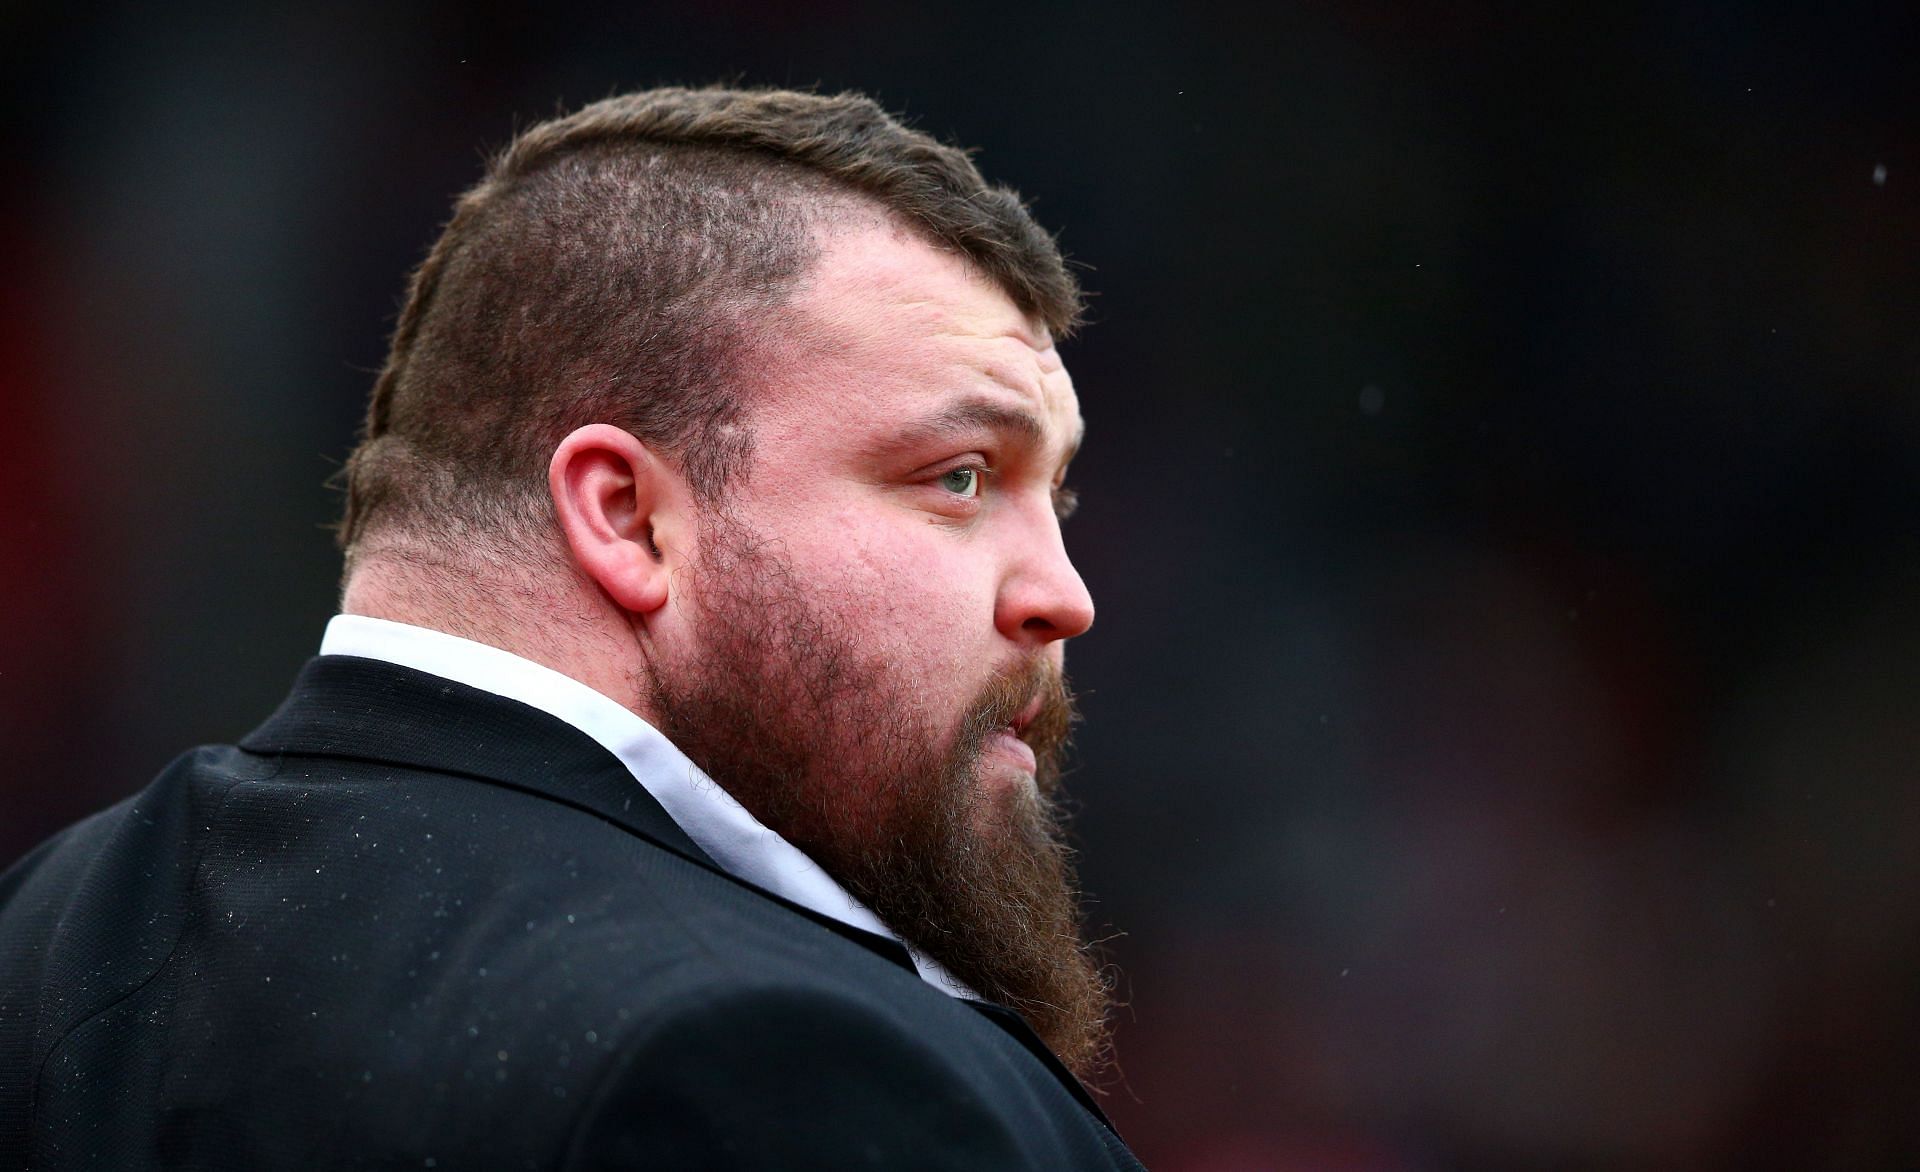 Eddie Hall has released a documentary ahead of his upcoming boxing debut